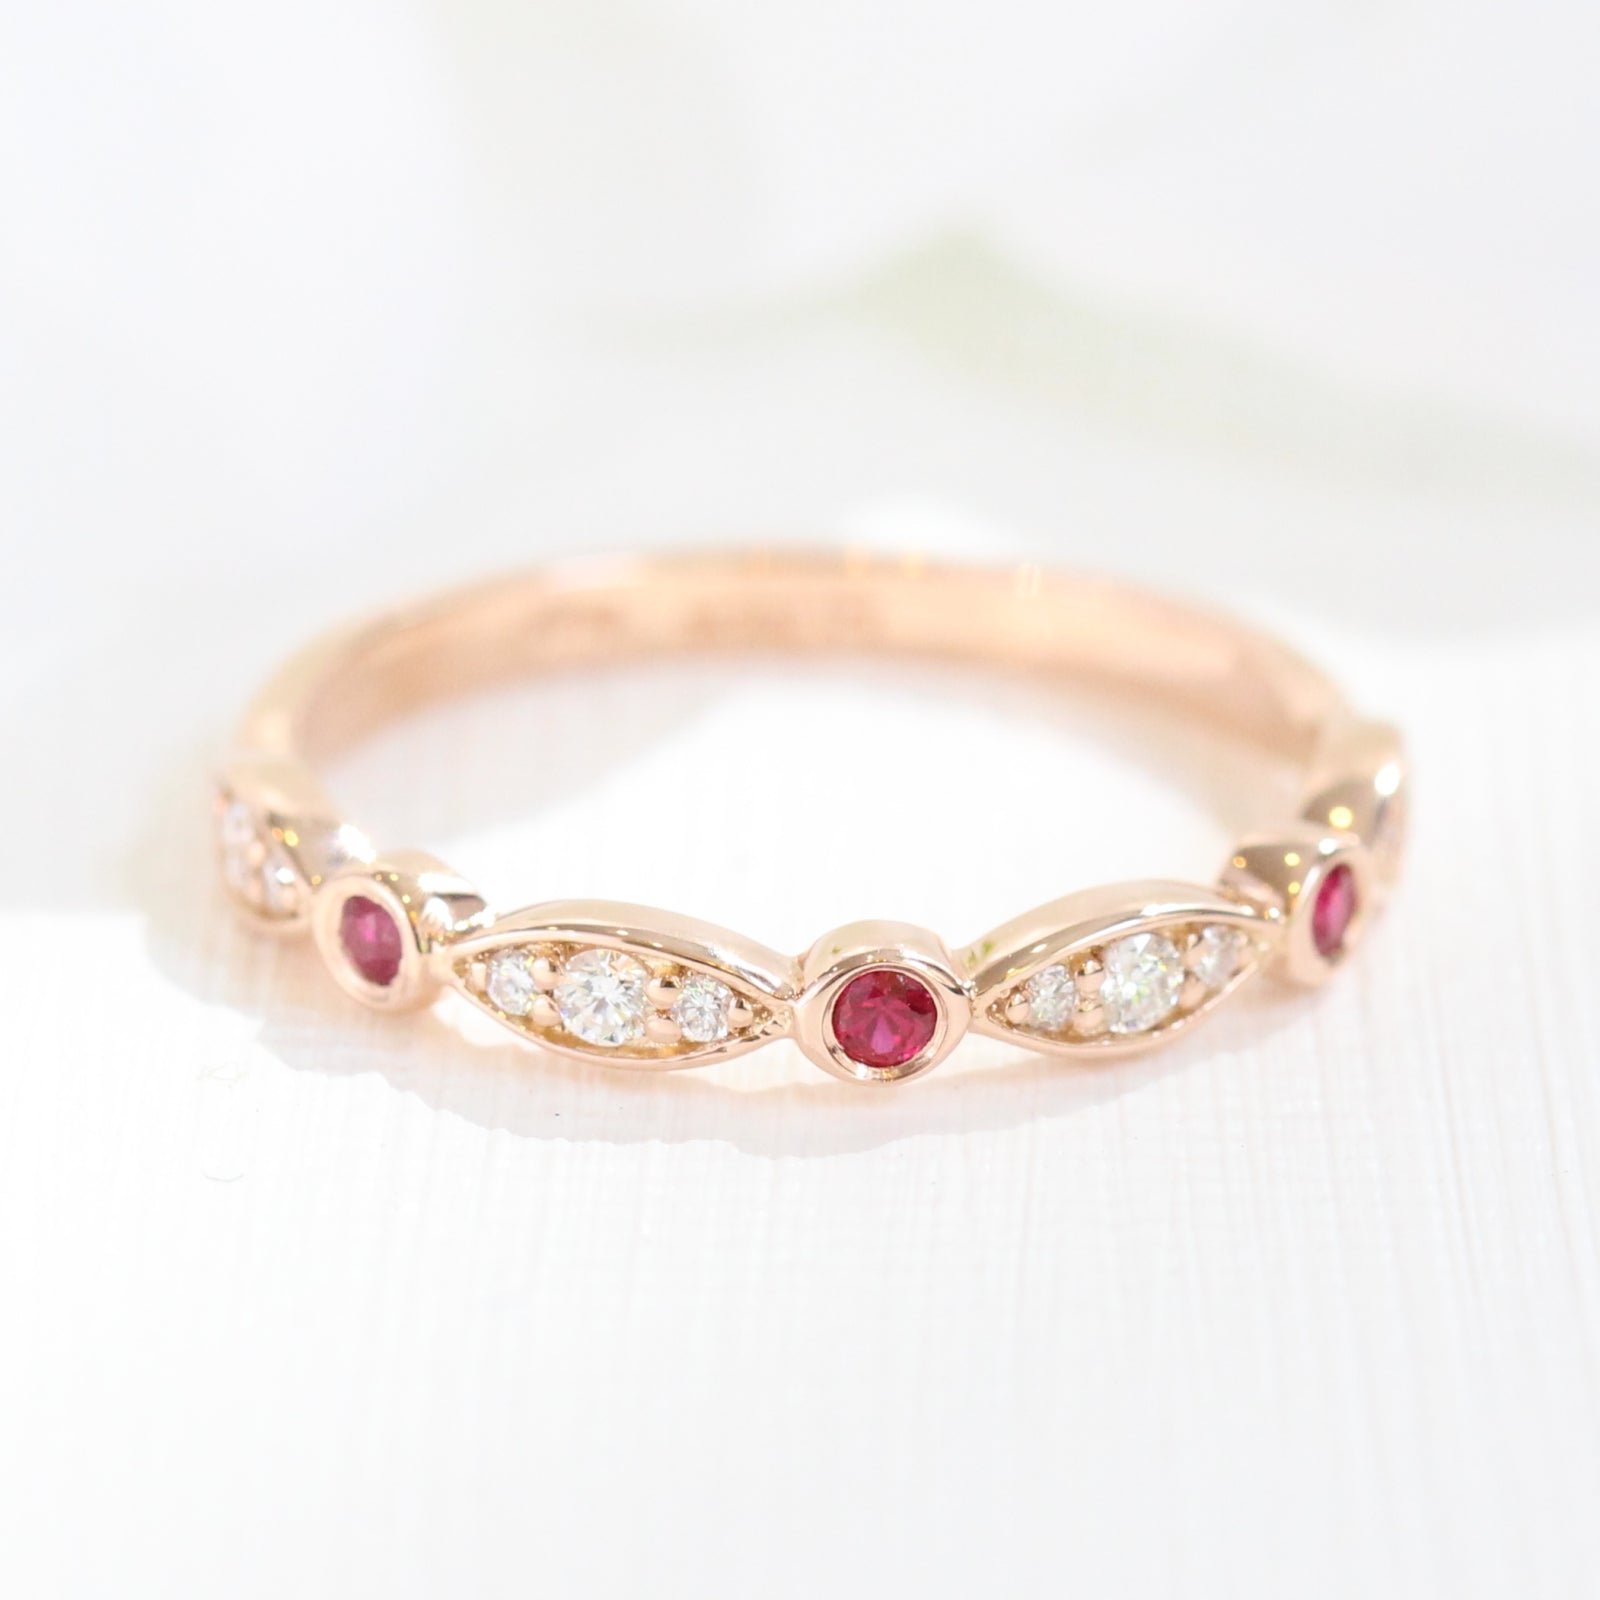 ruby and diamond wedding ring in rose gold bezel set half eternity wedding band by la more design jewelry